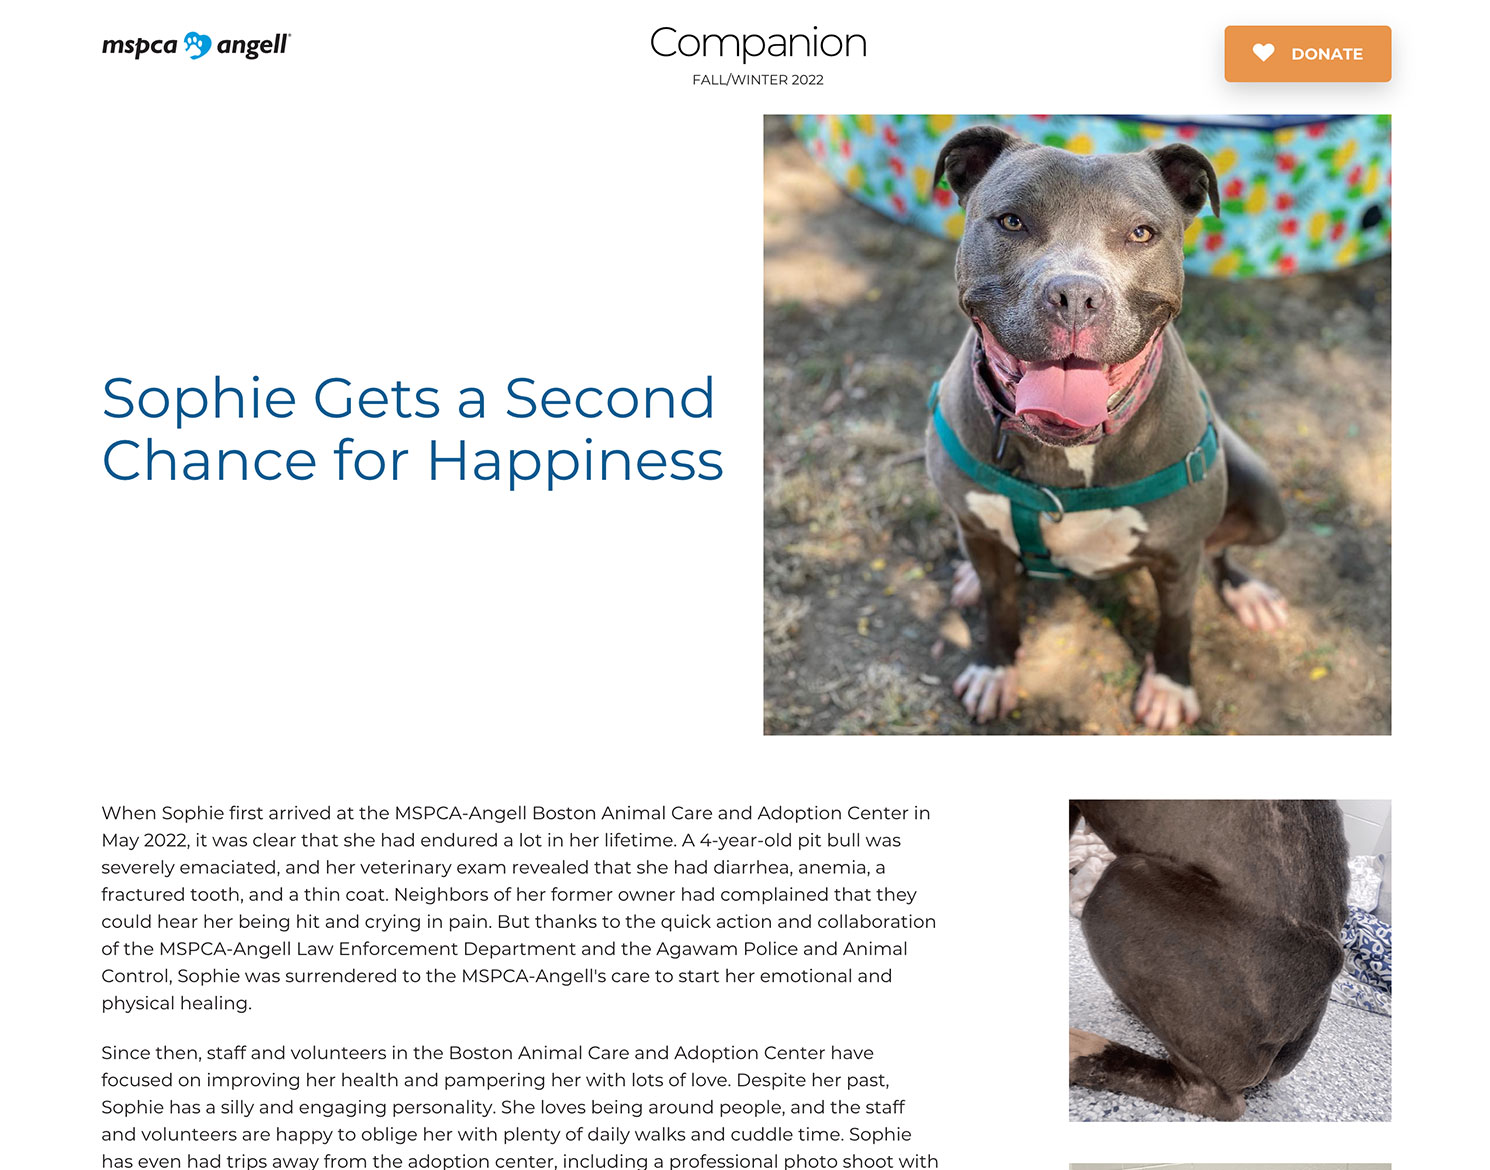 MSPCA-Angell newsletter website with story of dog named Sophie